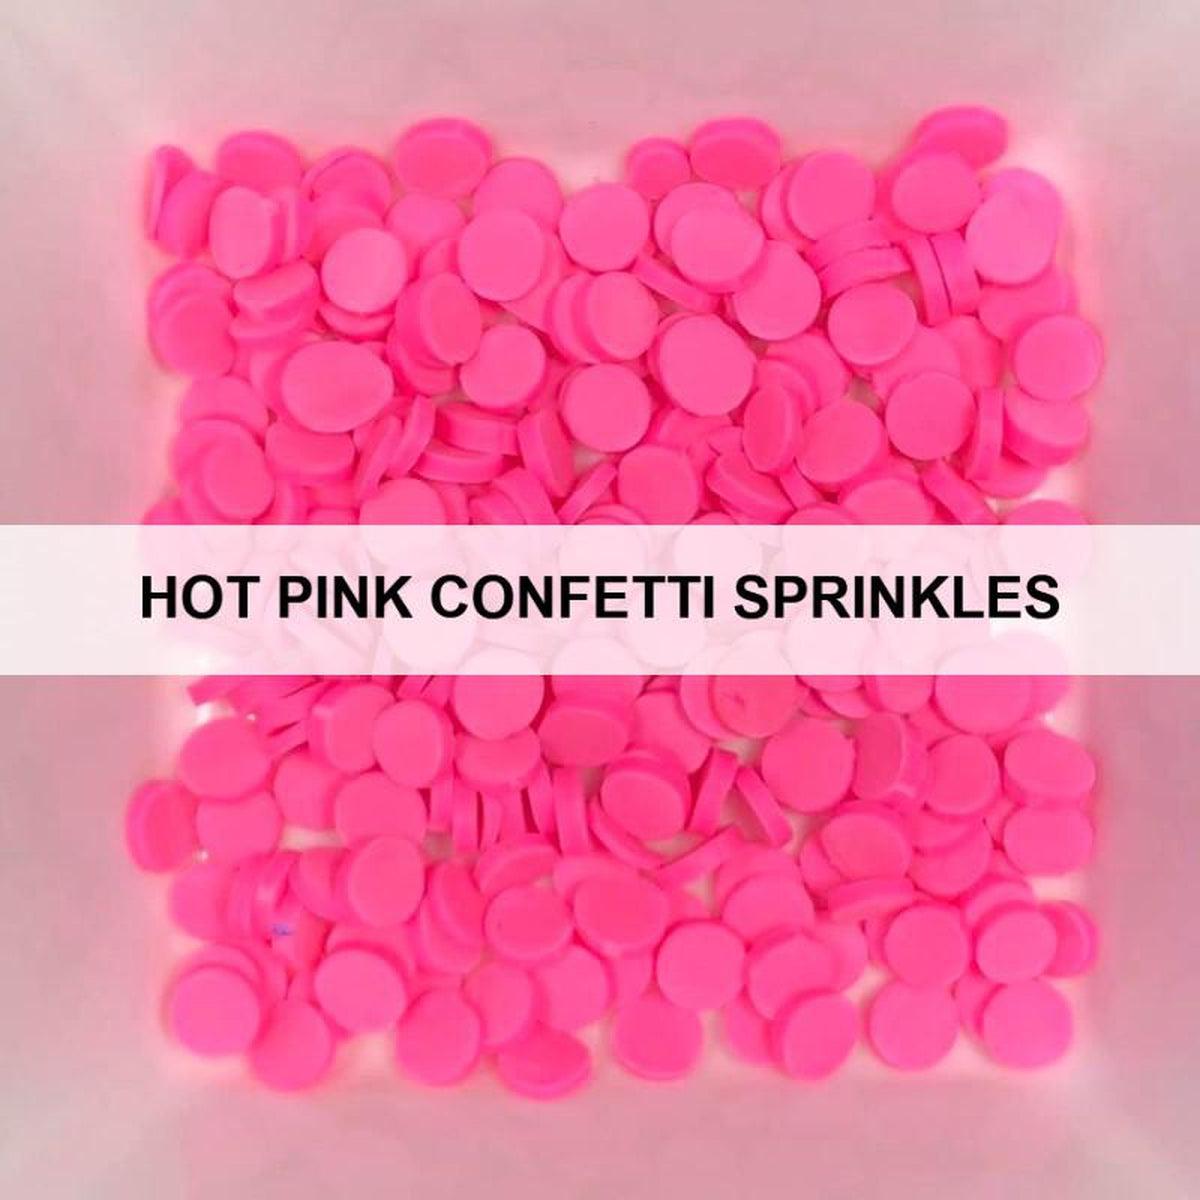 Hot Pink Confetti Sprinkles by Kat Scrappiness - Kat Scrappiness